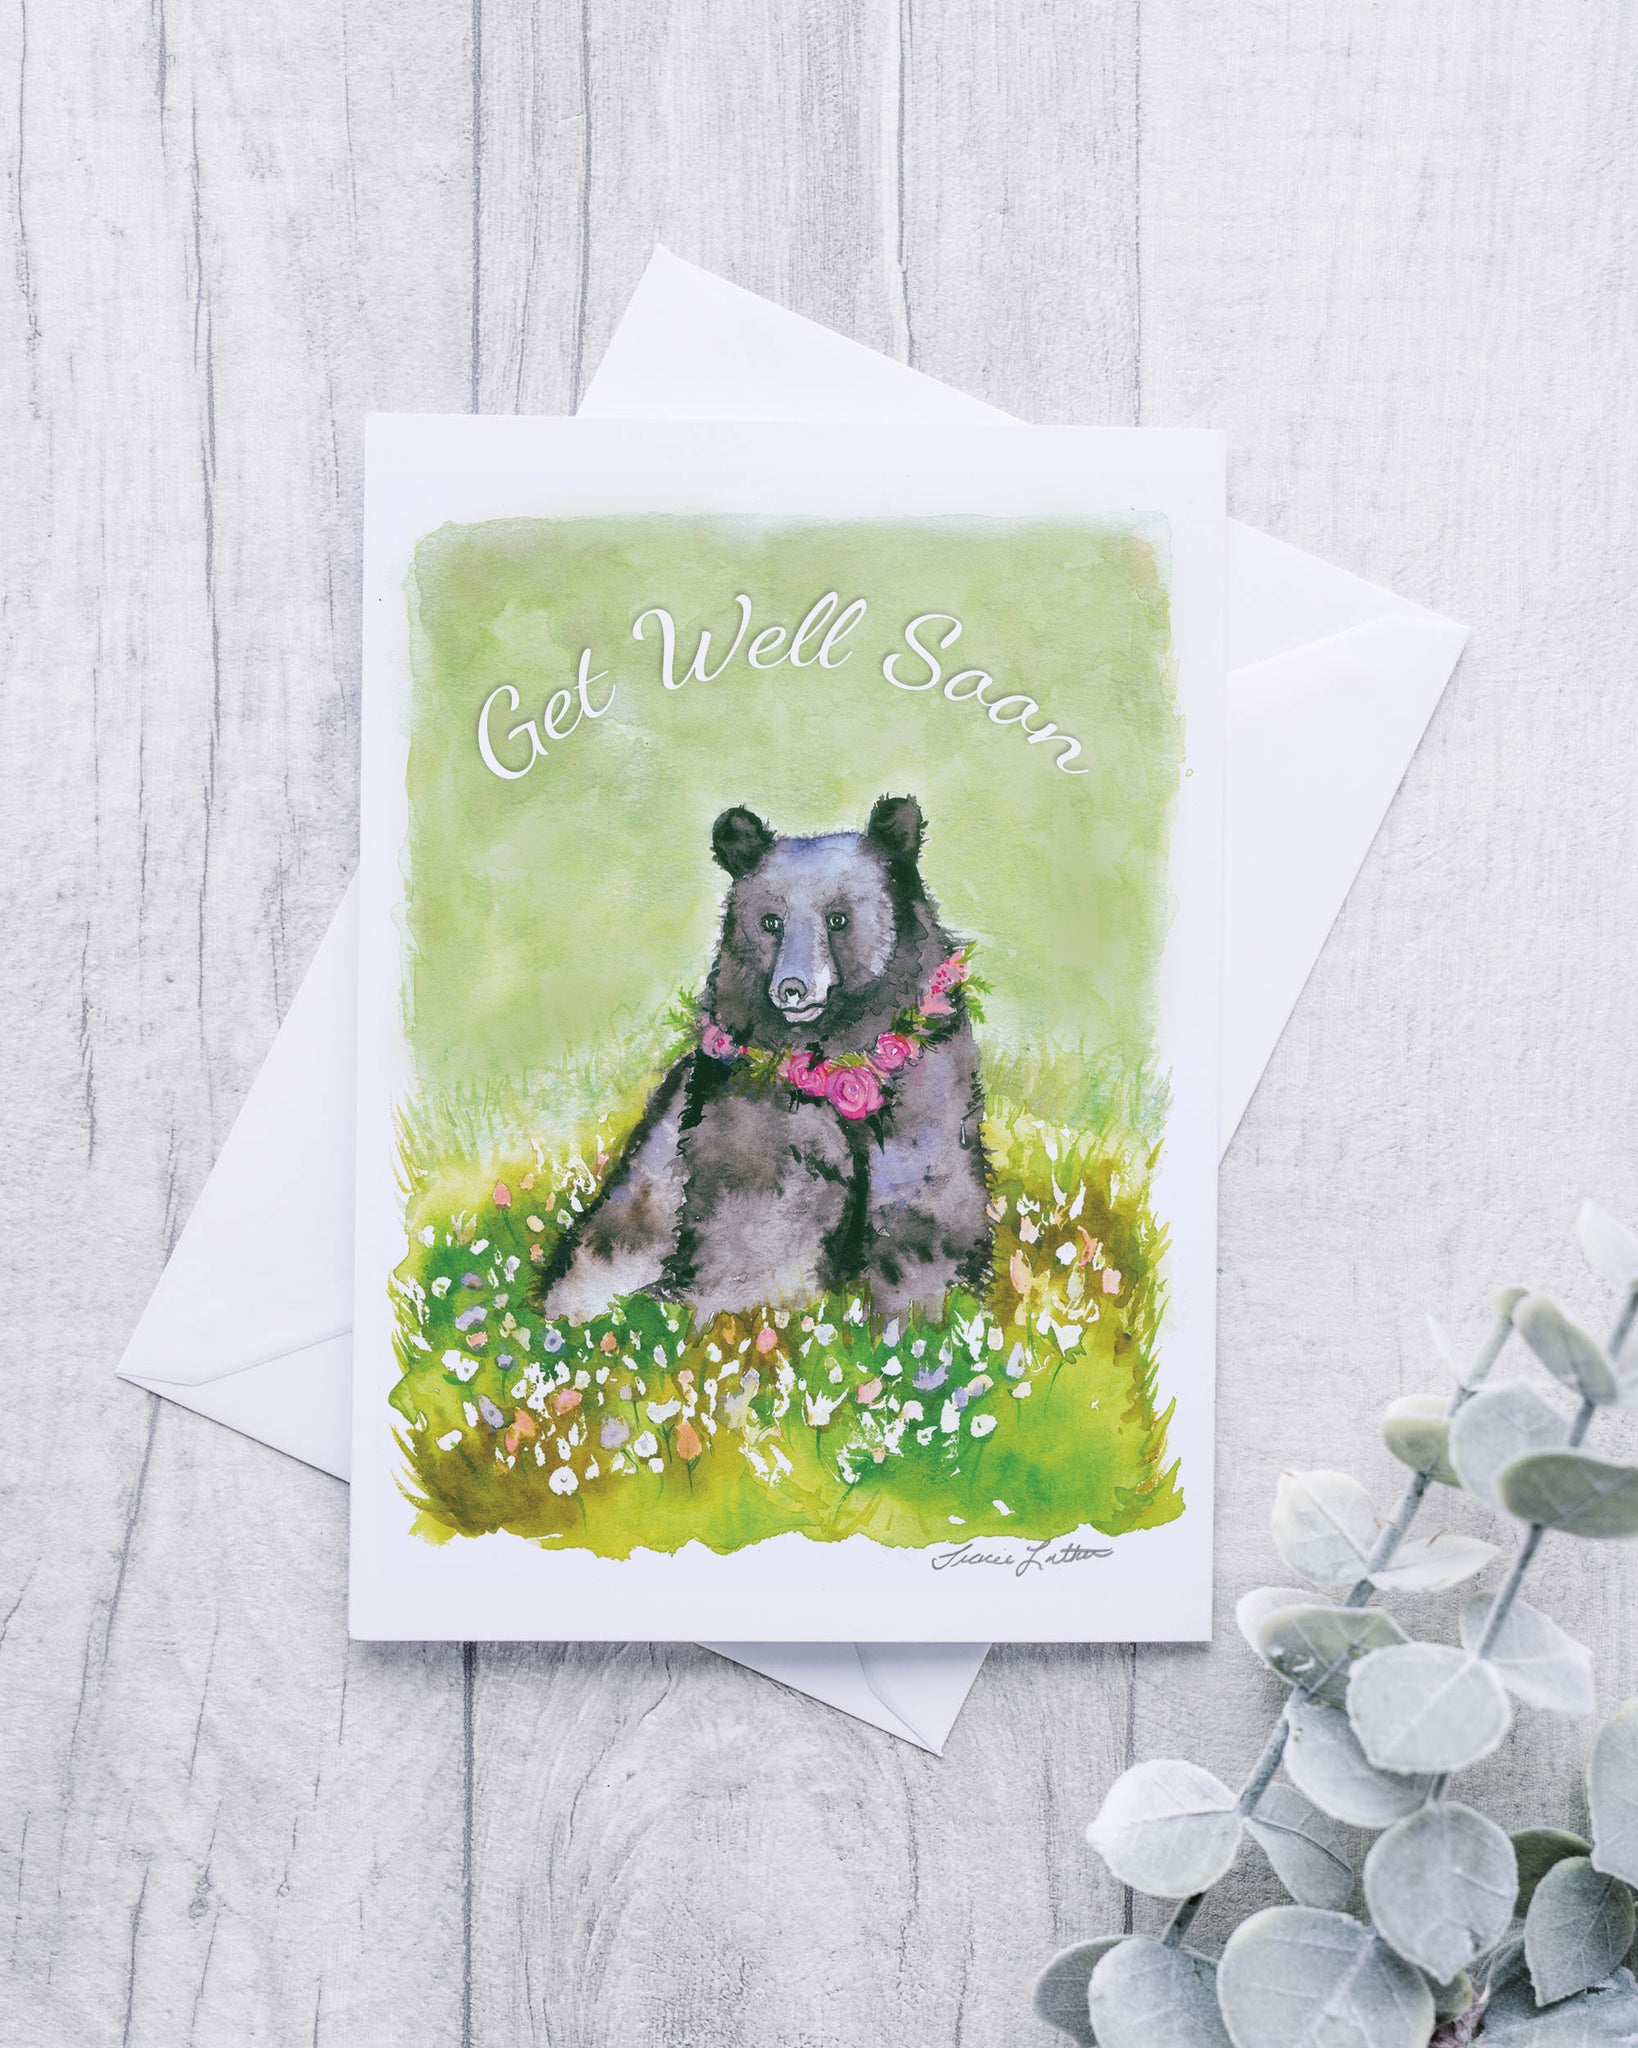 Black Bear with a Flower Necklace  "Get Well Soon!" Greeting Card